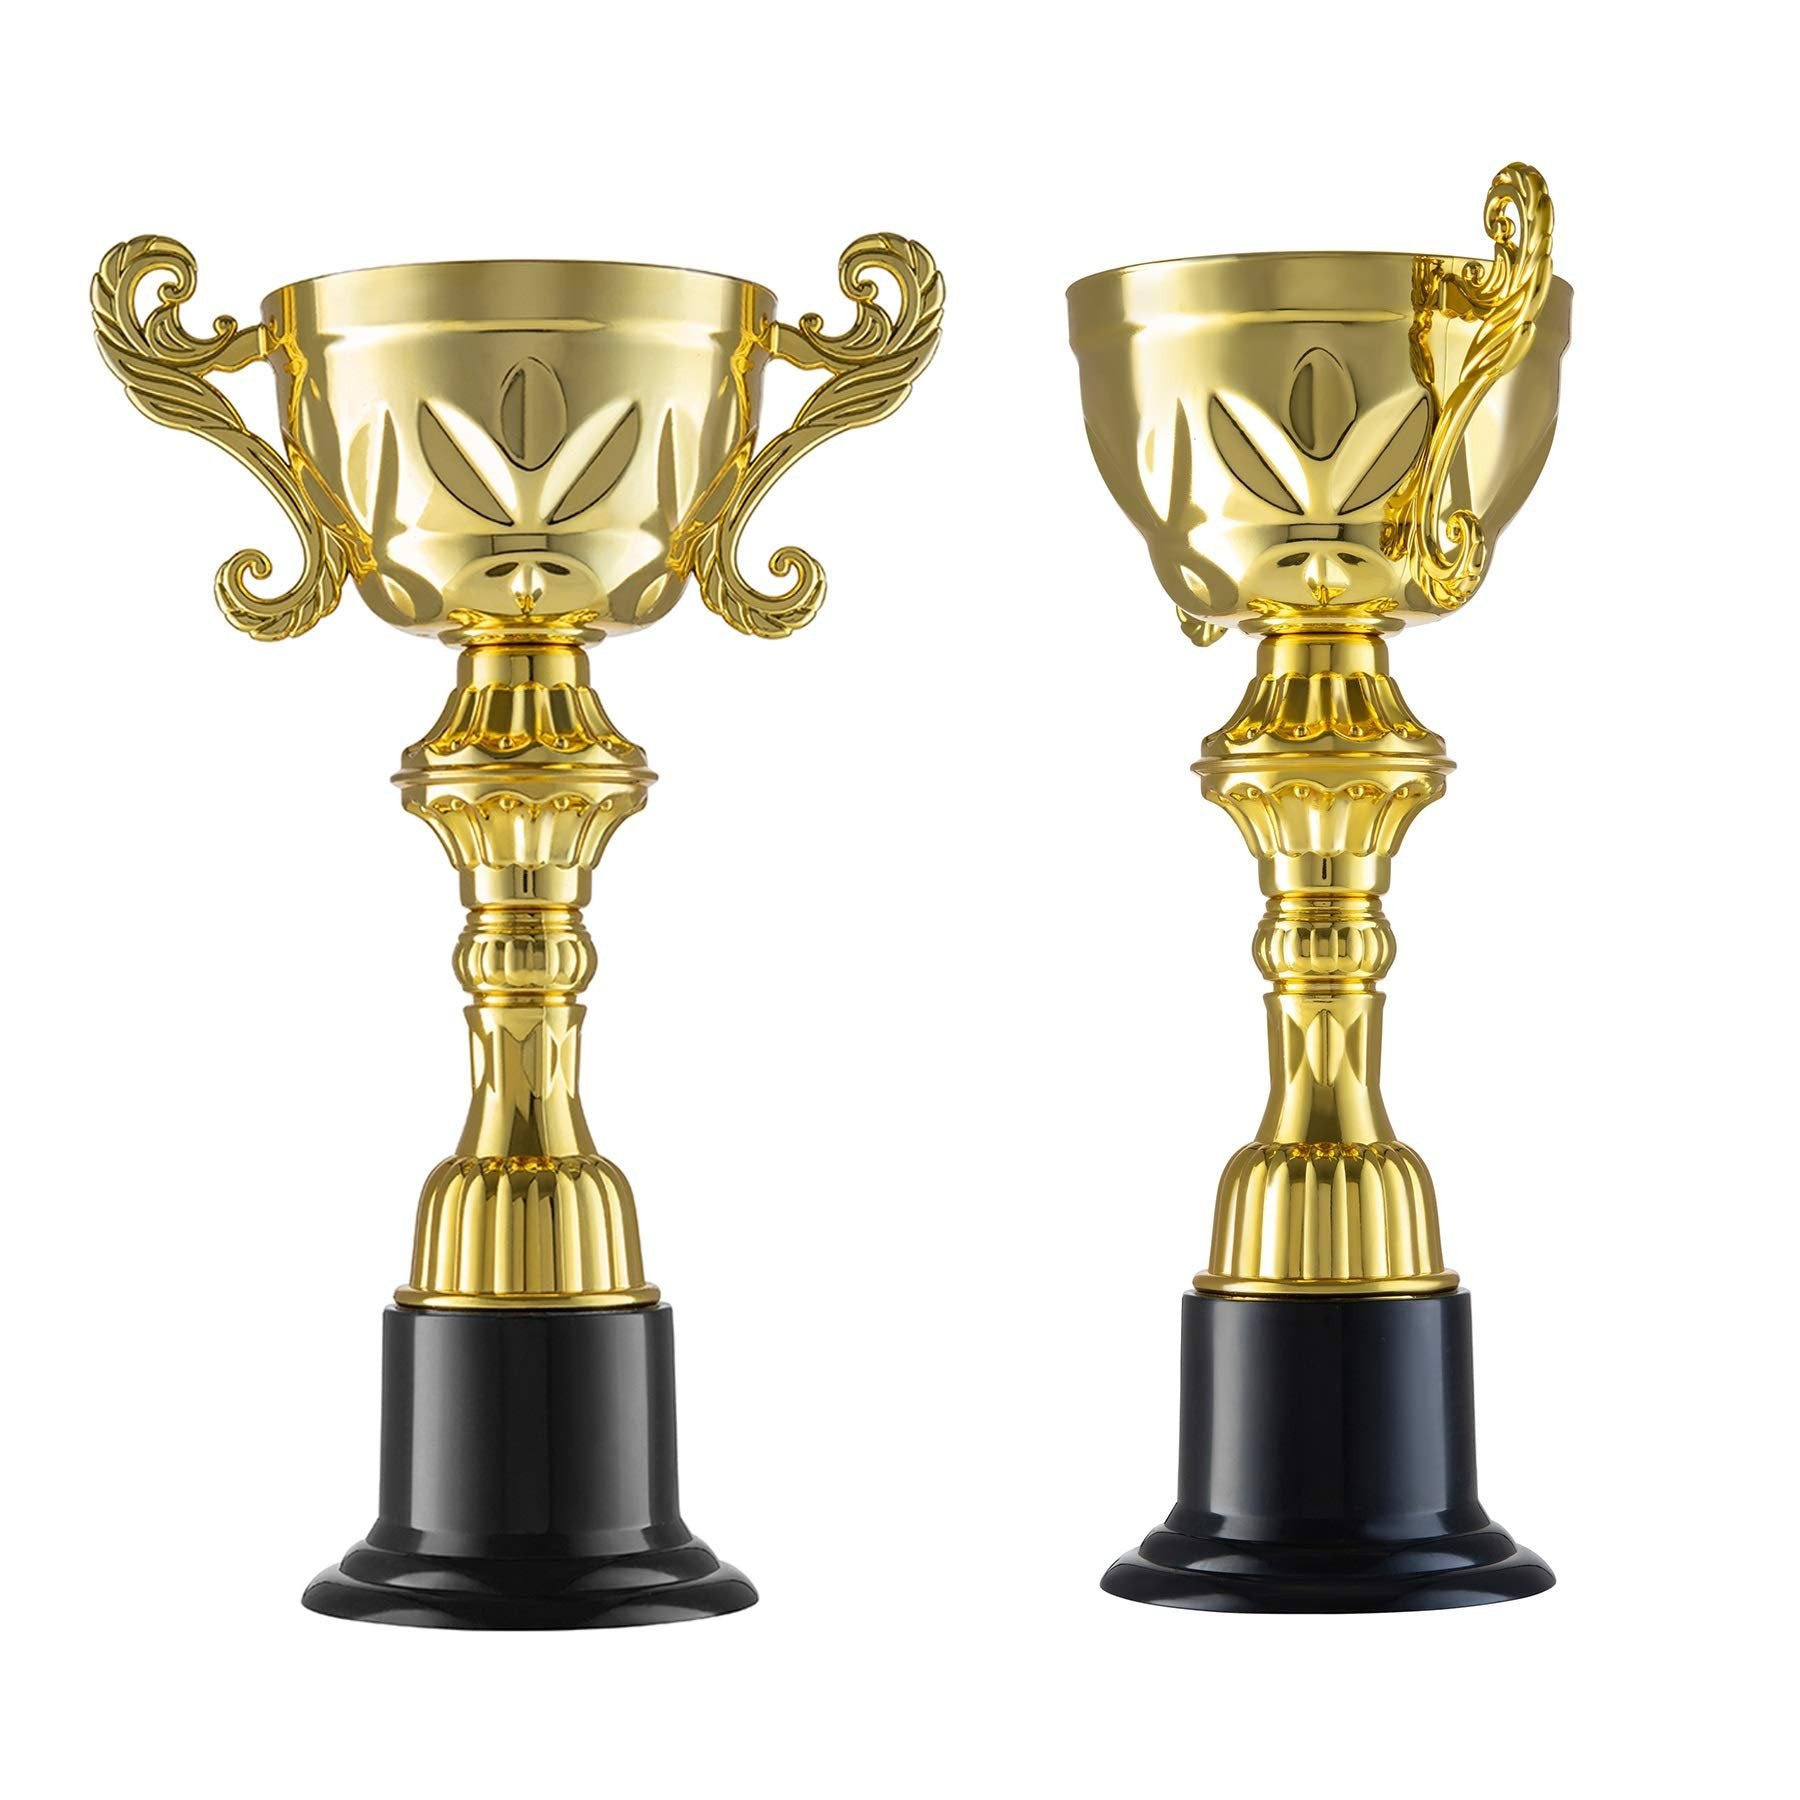 PREXTEX Movie Trophy Award - Awards and Trophies for Party Celebrations, Award Ceremonies, and Appreciation Gifts - Ideal for Competitions, Rewards, and Party Favors for Kids & Adults